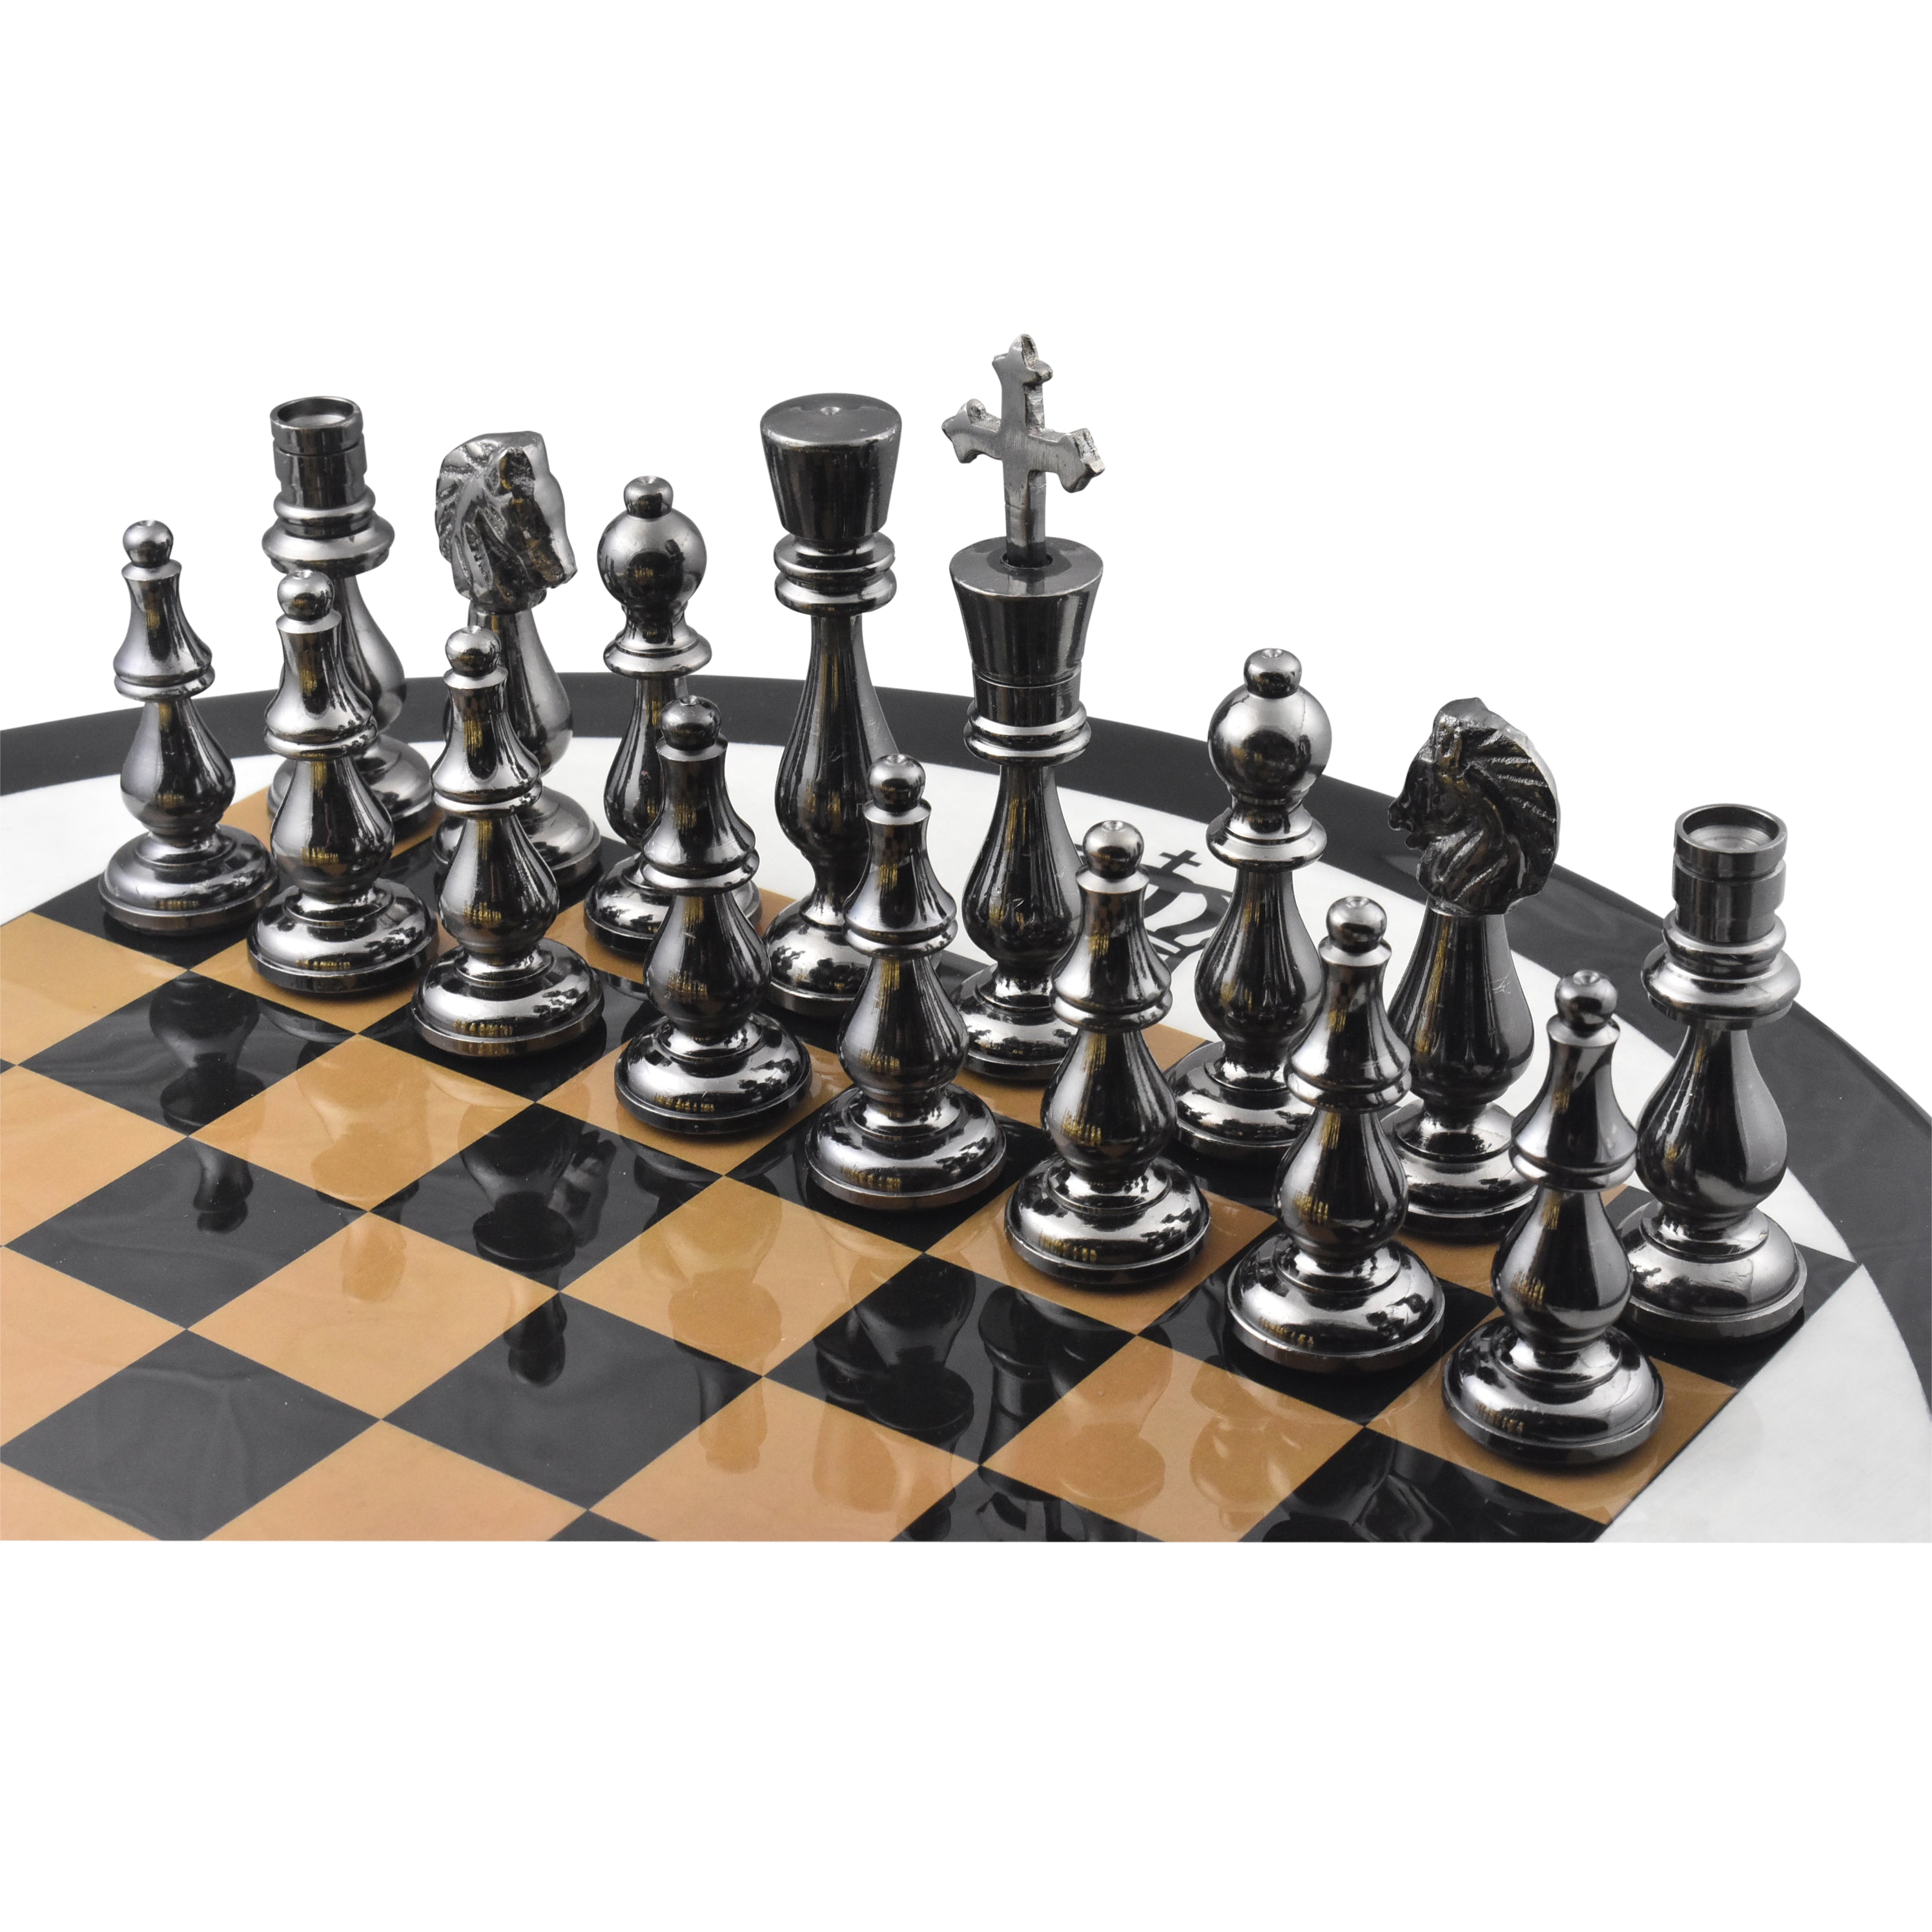 Blessings Decor Collectible Premium Metal Brass Chess Board Game Set Brass  Chess Pieces Men with Free Complimentary Box